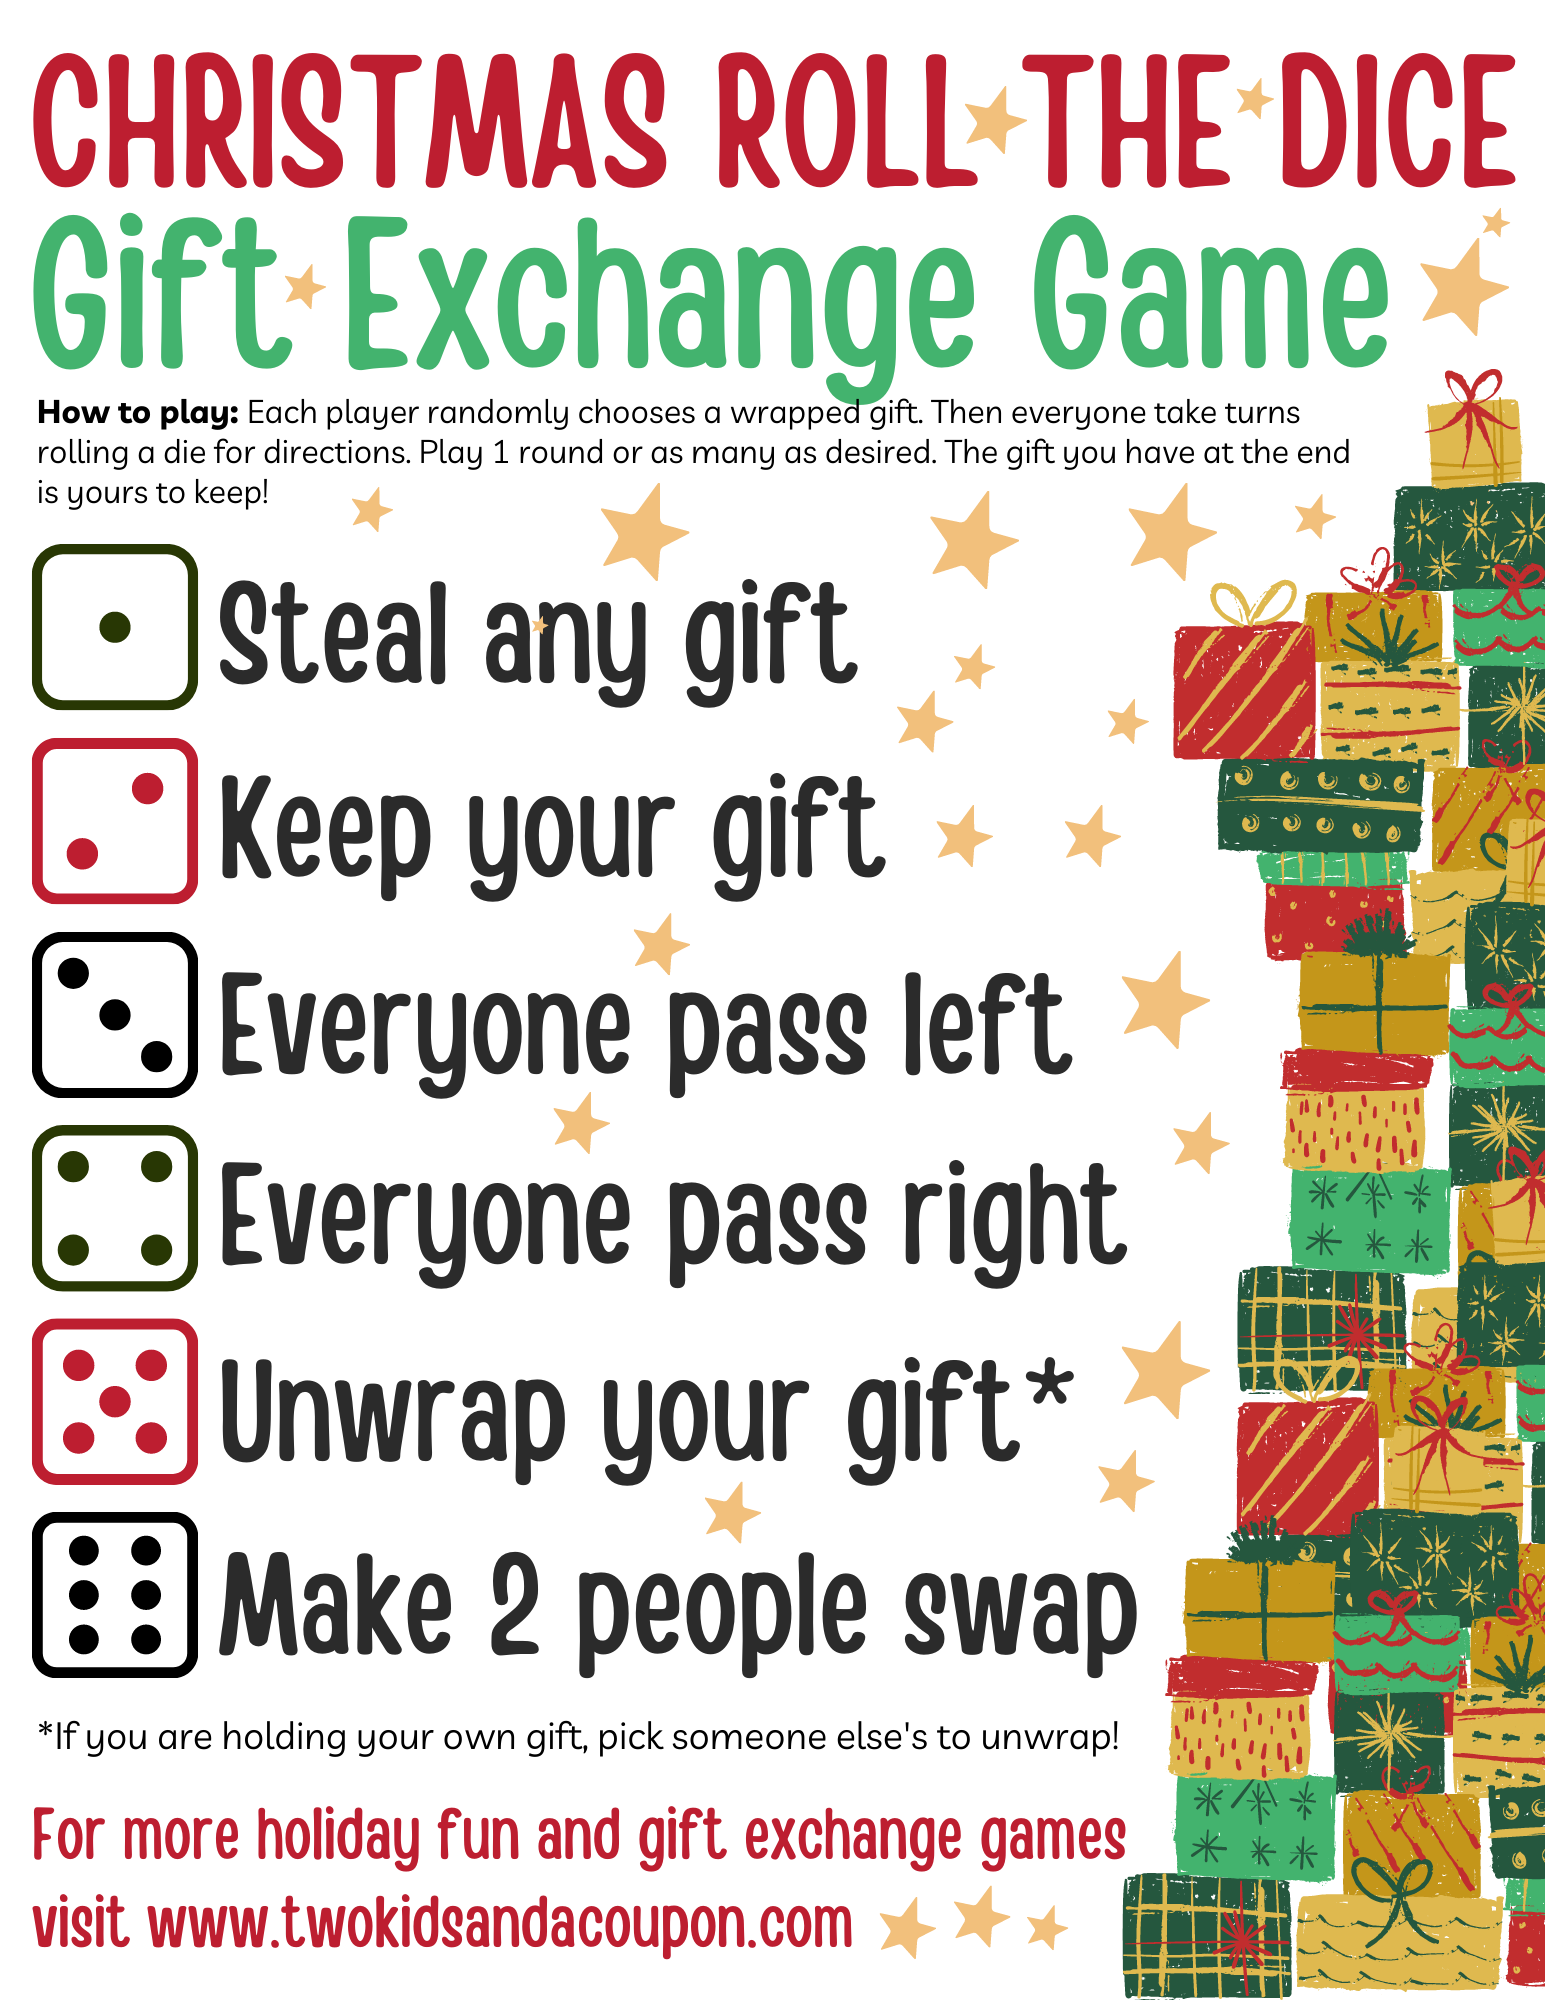 free-printable-christmas-dice-game-for-gift-exchanges-diyideacenter